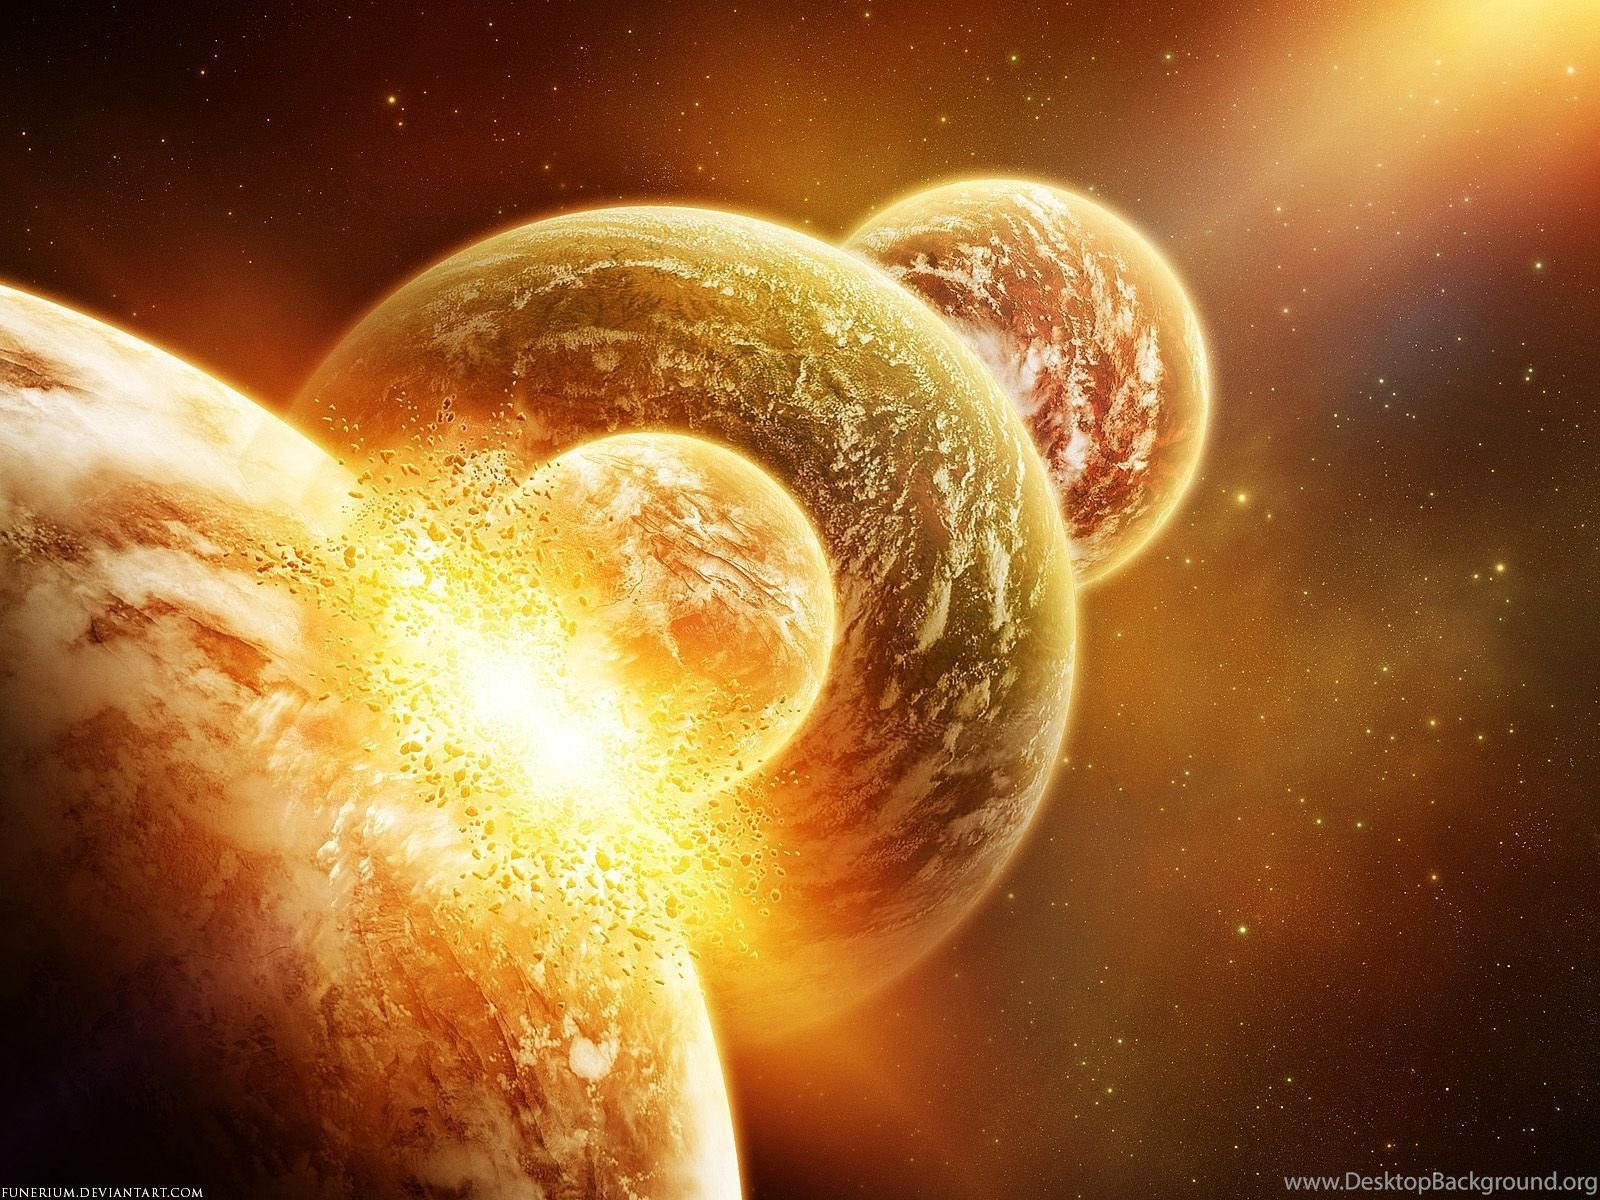 Full HD Wallpaper + Space, Explosions, Planets, Stars, Yellow Desktop Background